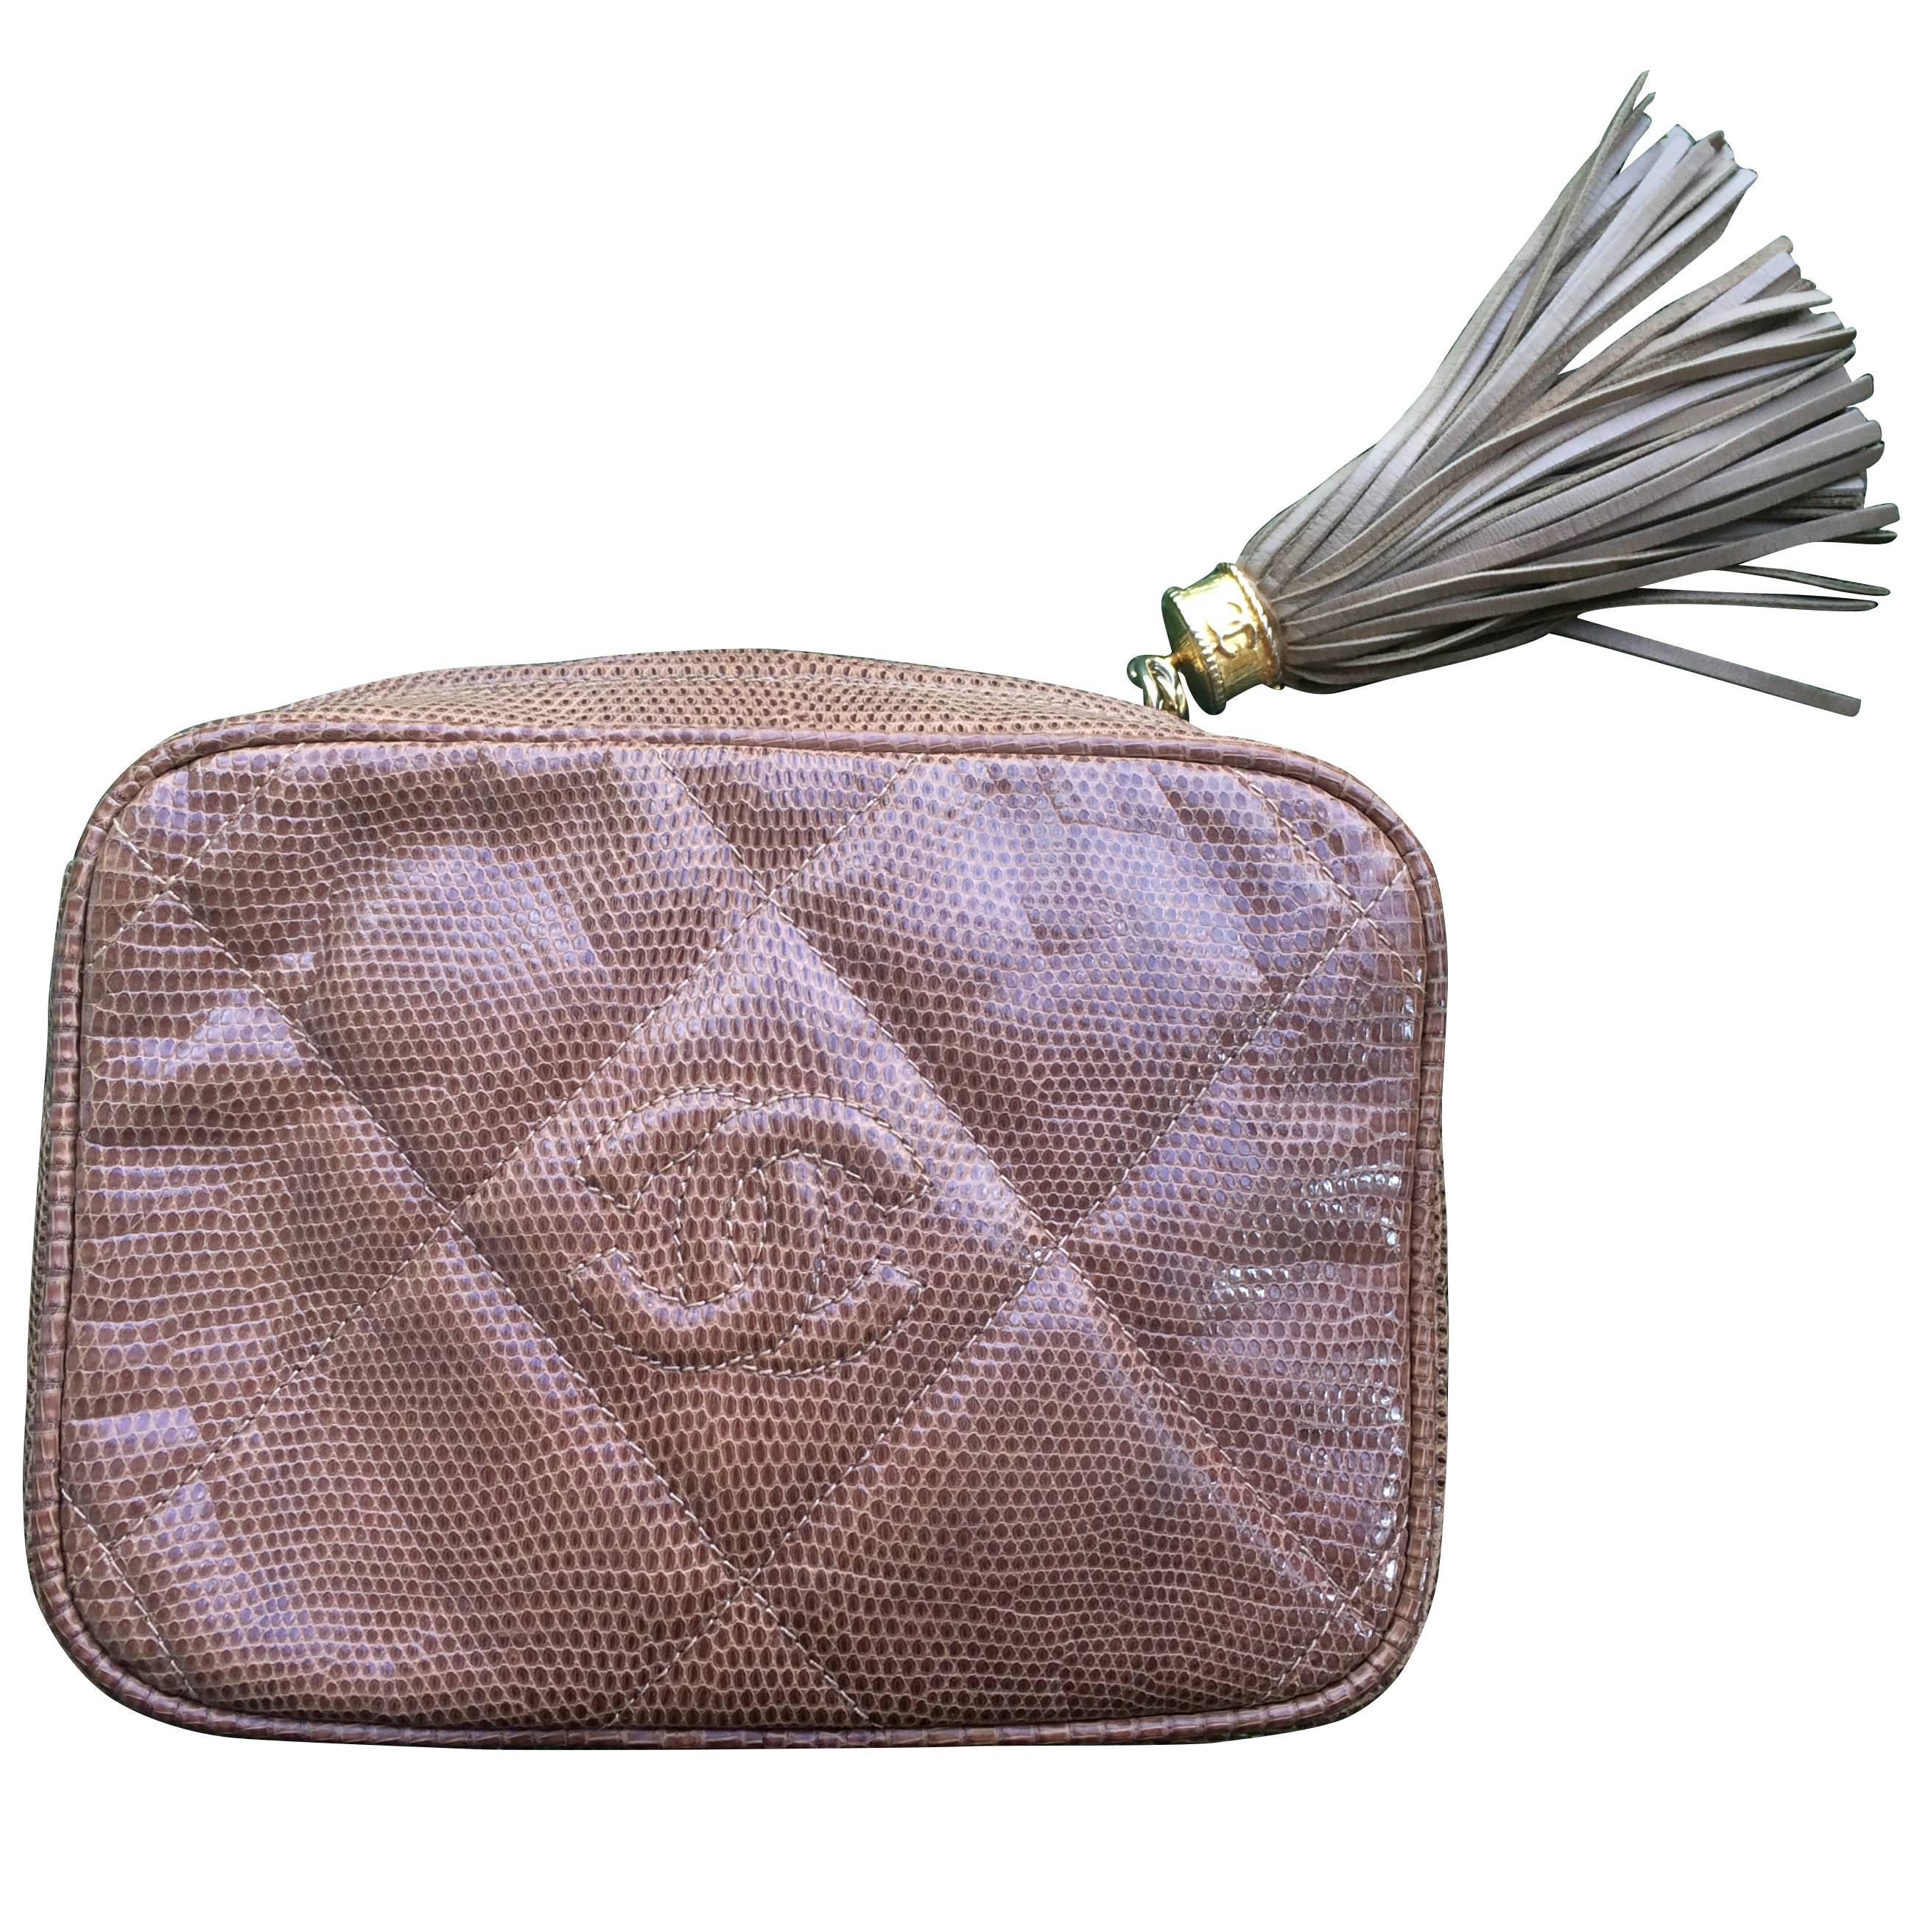 Vintage CHANEL brown lizard camera bag type clutch bag with fringe and CC mark. For Sale